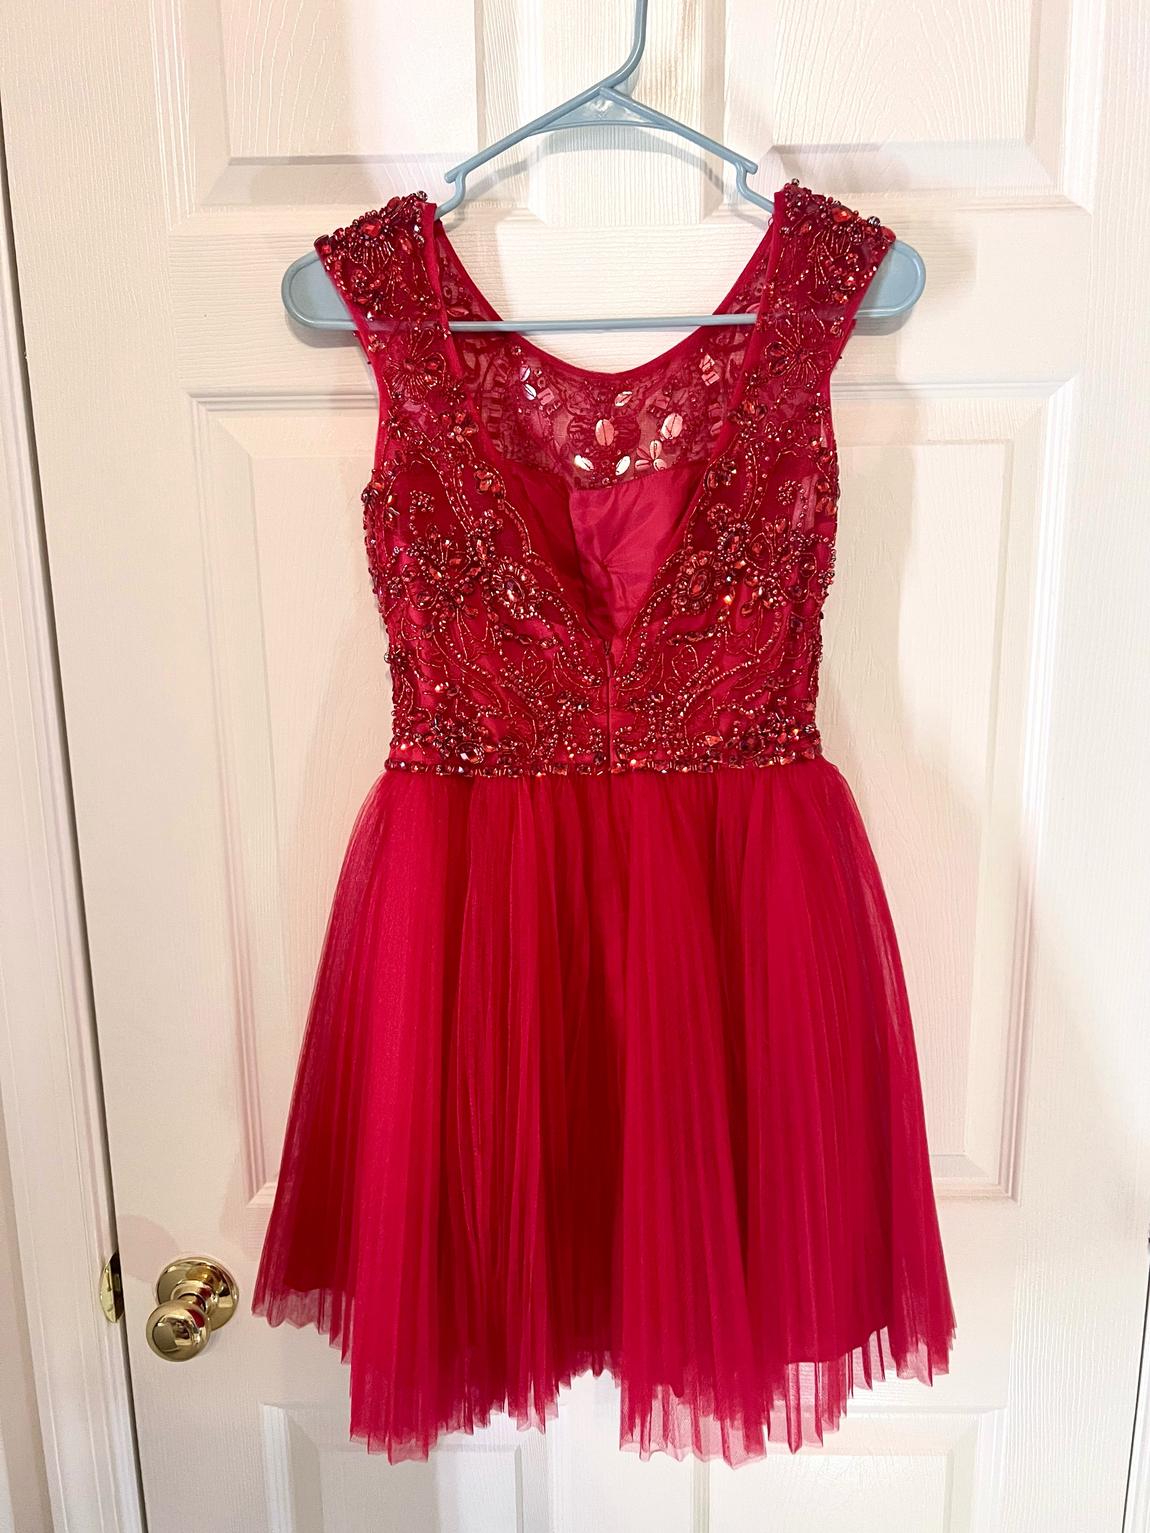 Sherri Hill Size 2 Homecoming High Neck Sequined Burgundy Red Cocktail Dress on Queenly